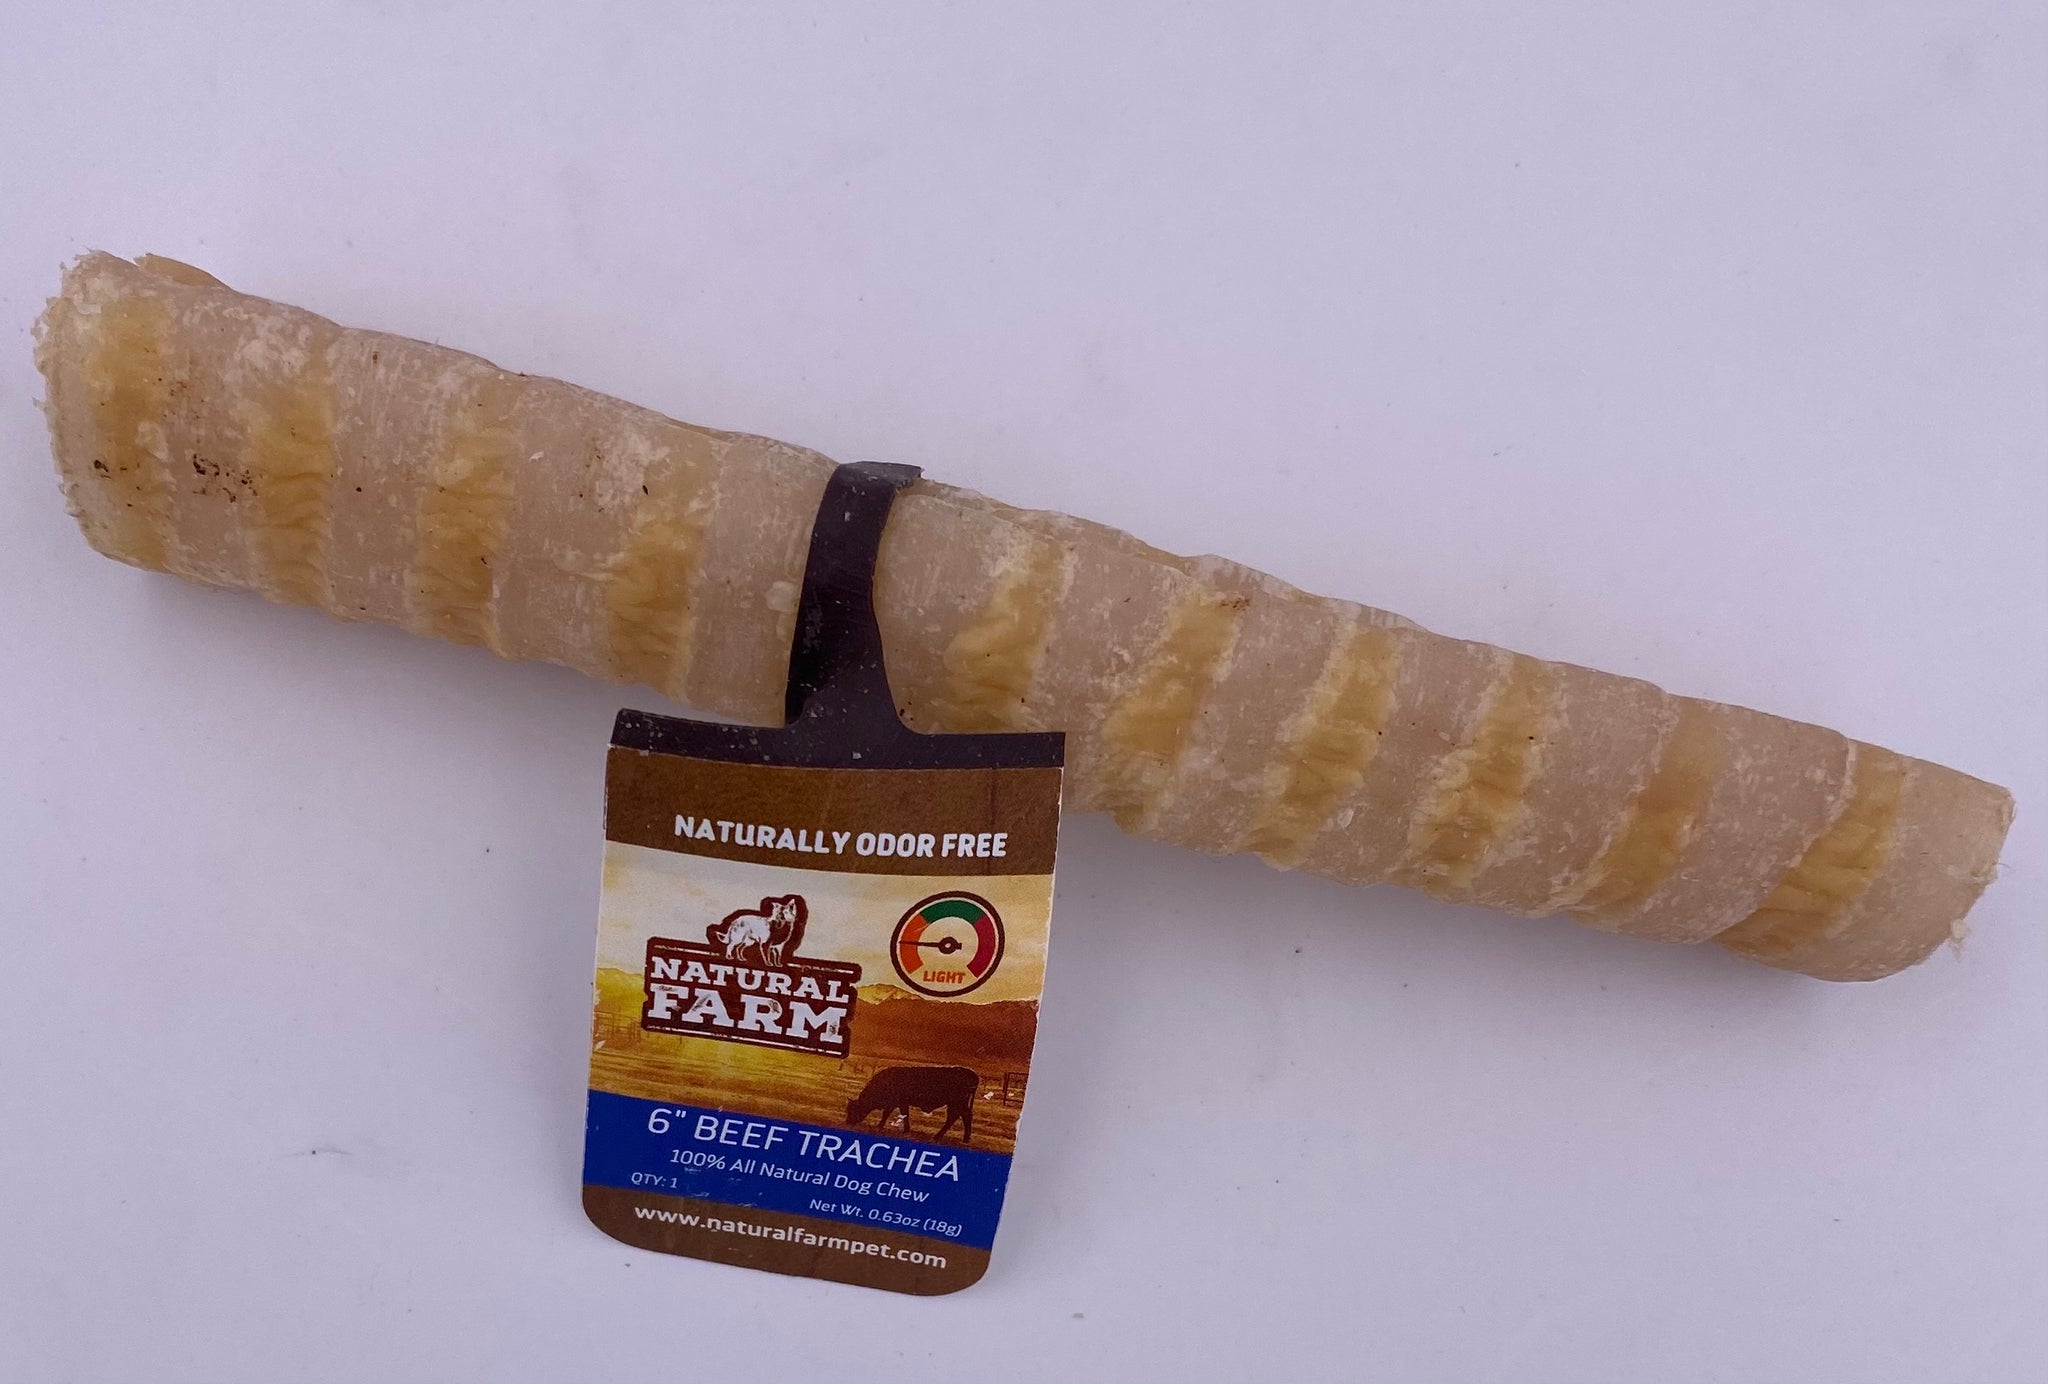 6 Inch Natural Farm Beef Trachea Great single ingredient treat.  Great for dental health, fully digestible, for any size dog and naturally odor free.  